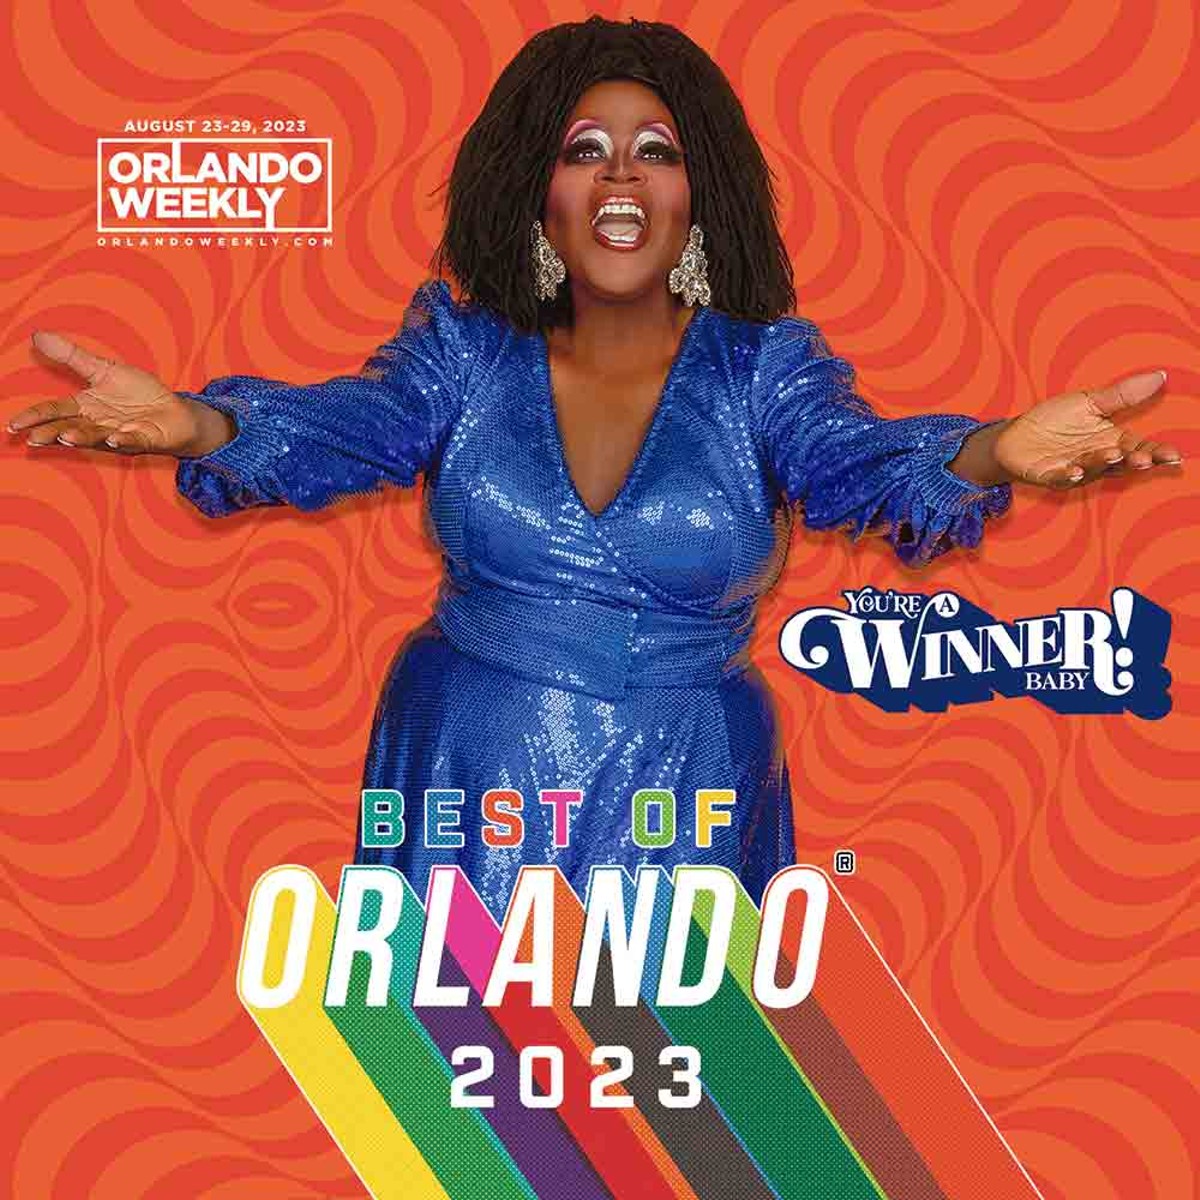 Best Sportertainment in Orlando 2023/24: Tickets, Info, Reviews, Videos and  more